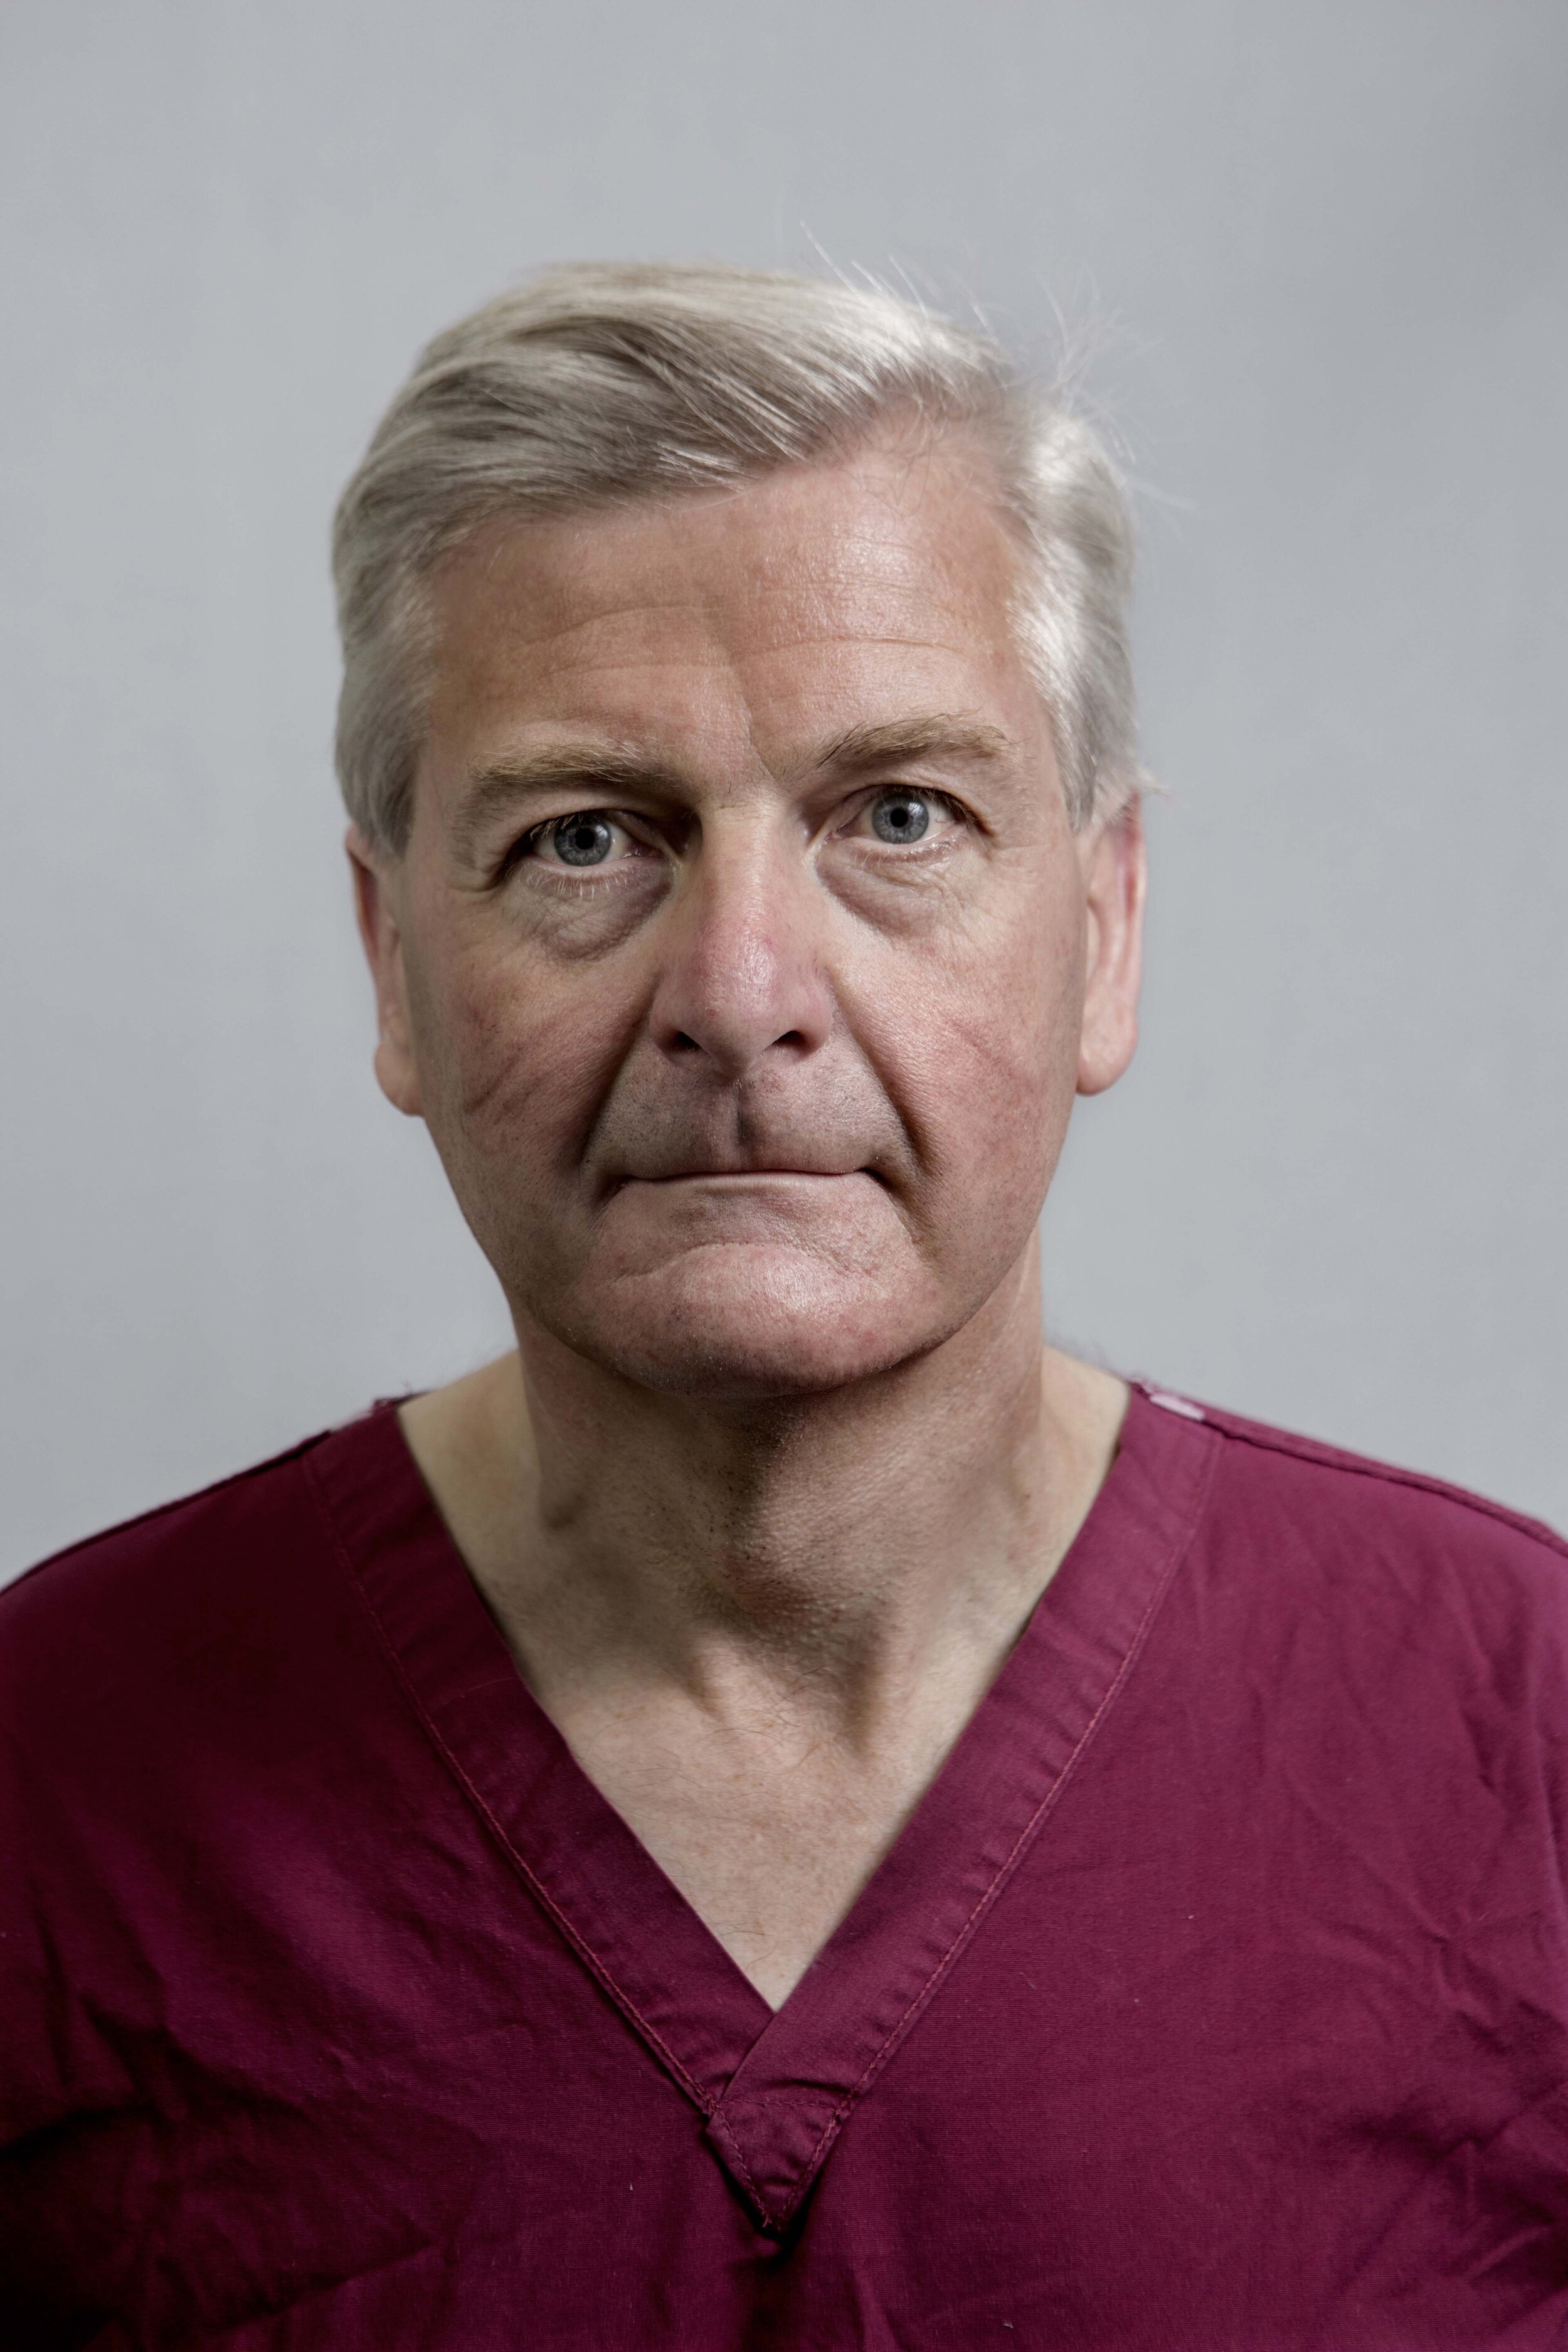 Professor David Lomas, head of the UCL Medical School and UCLH consultant